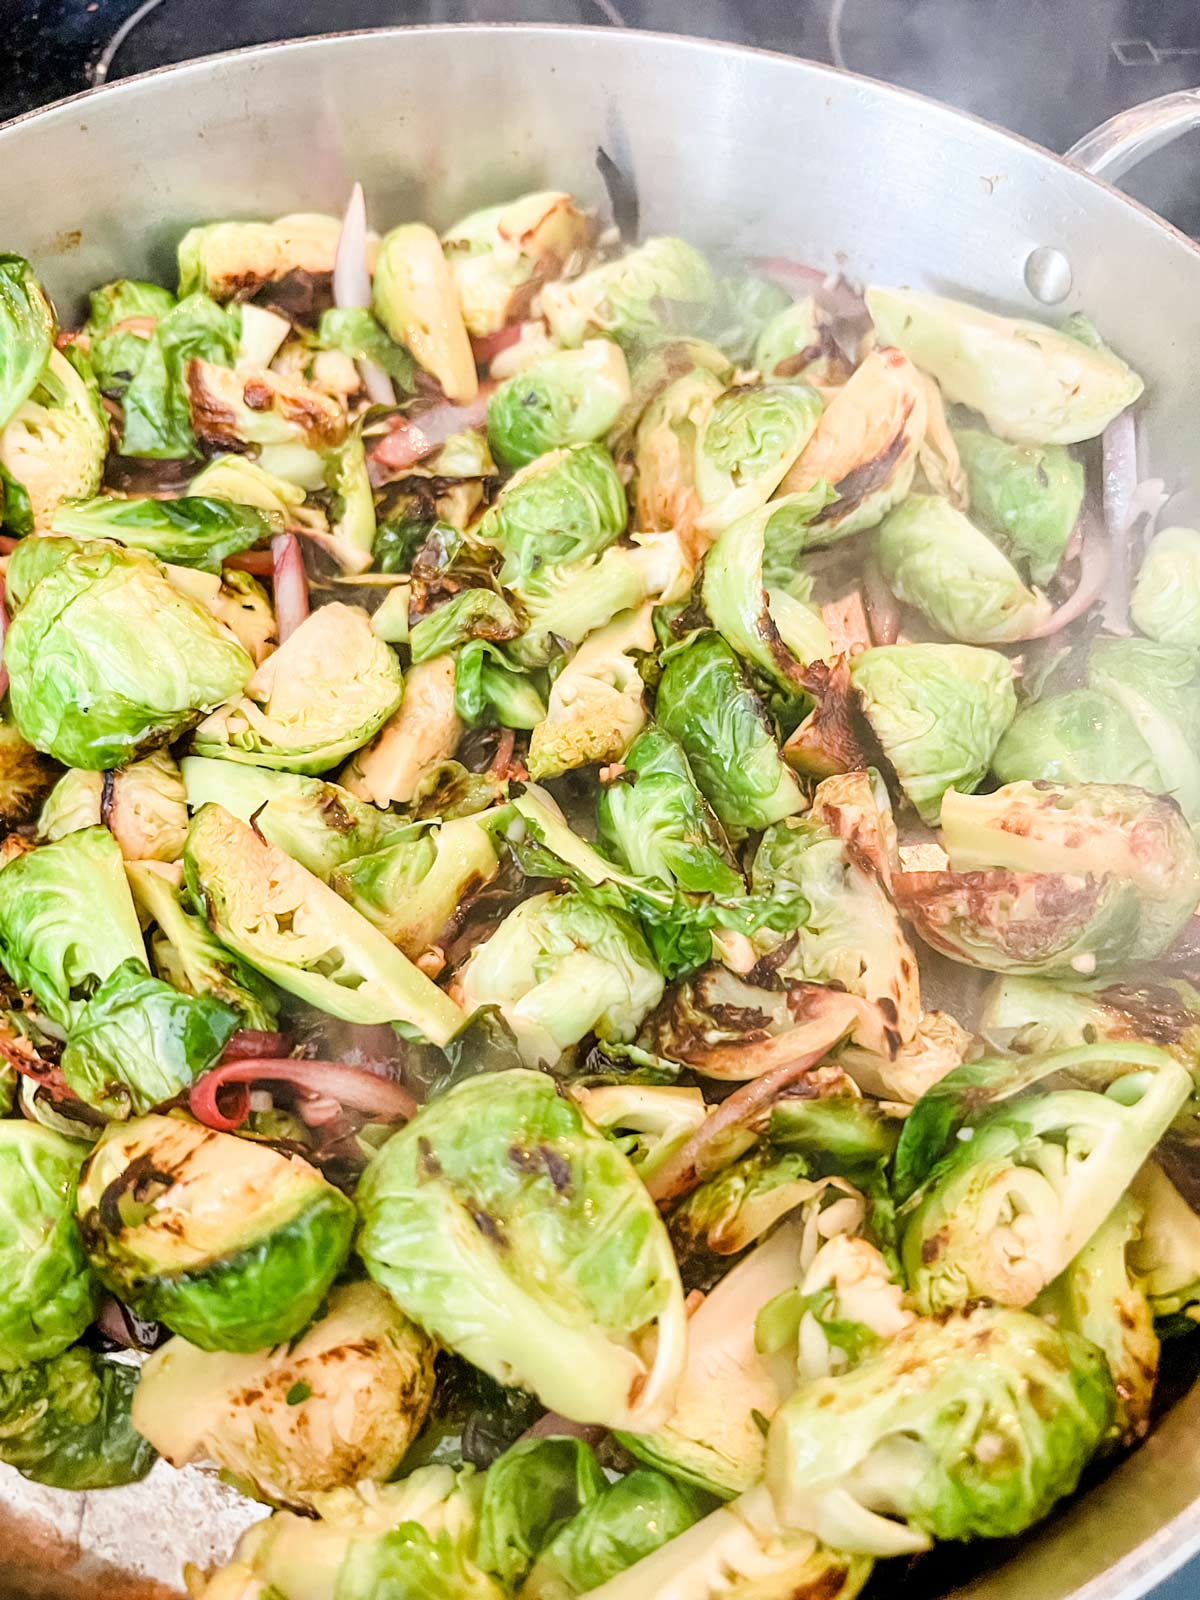 brussels sprouts onion, and garlic in a large skillet with a lemon balsamic sauce.